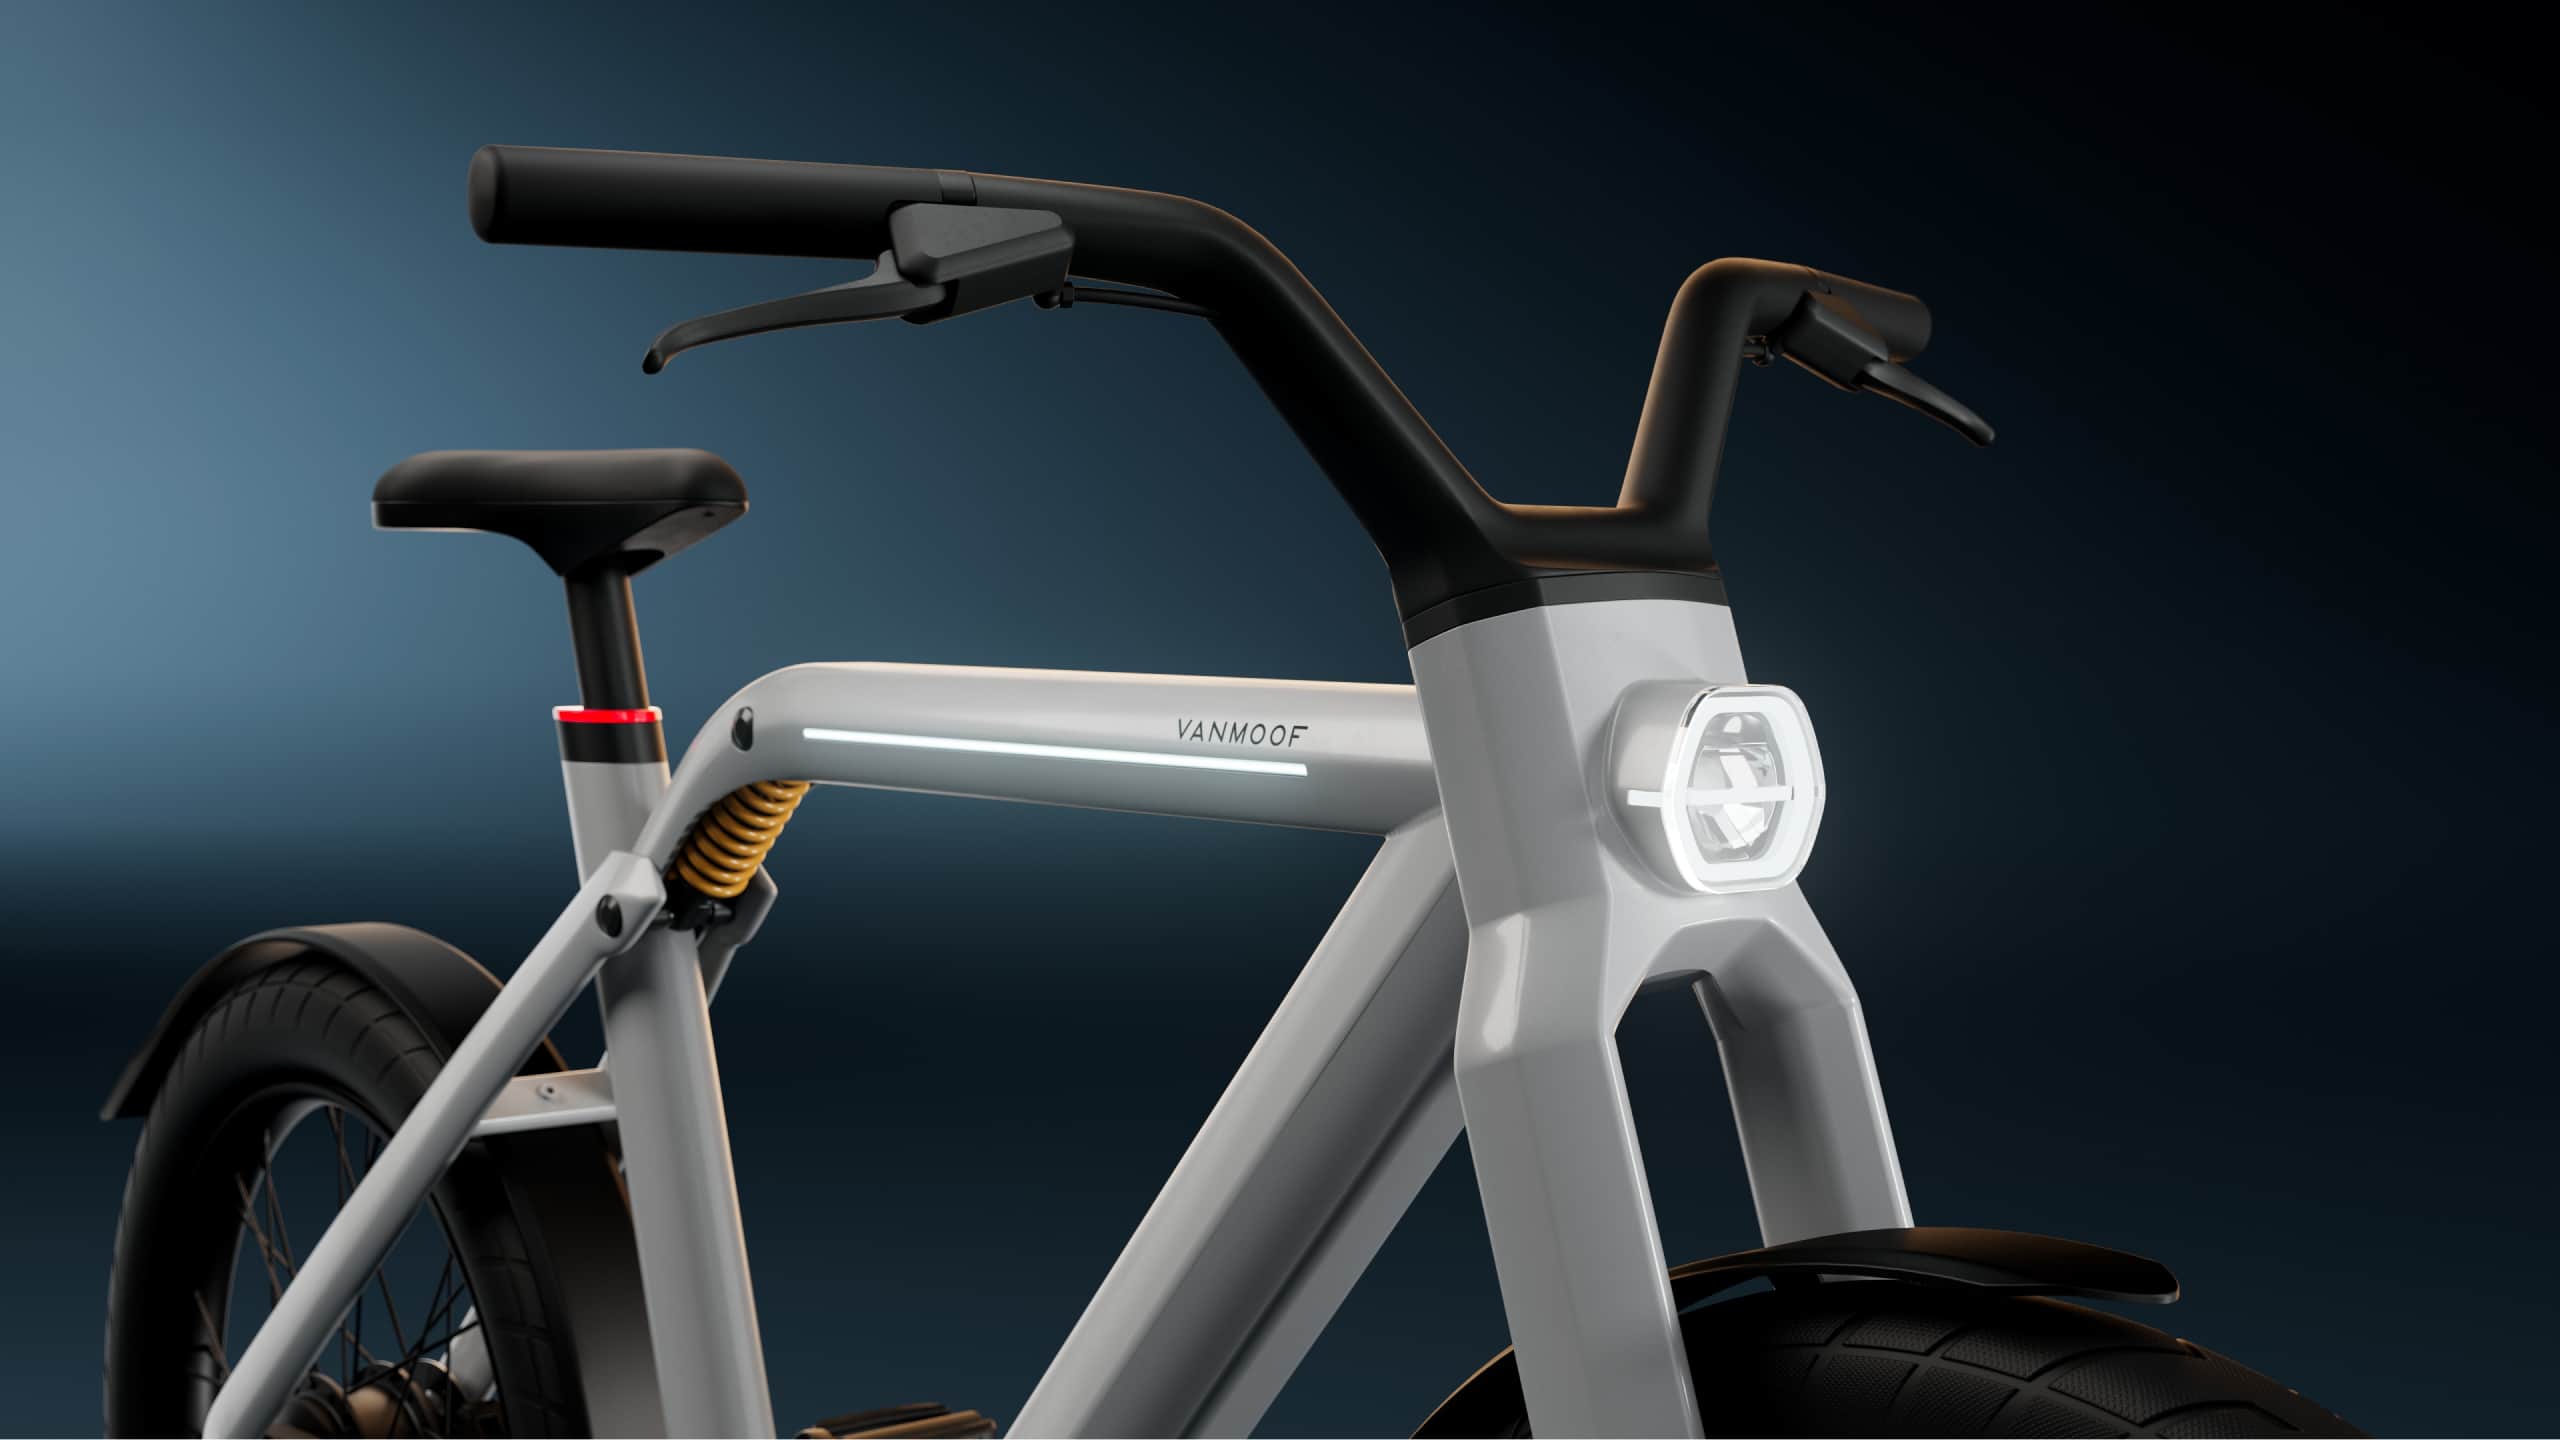 VanMoof unveiled an electric bike capable of 60 km/h